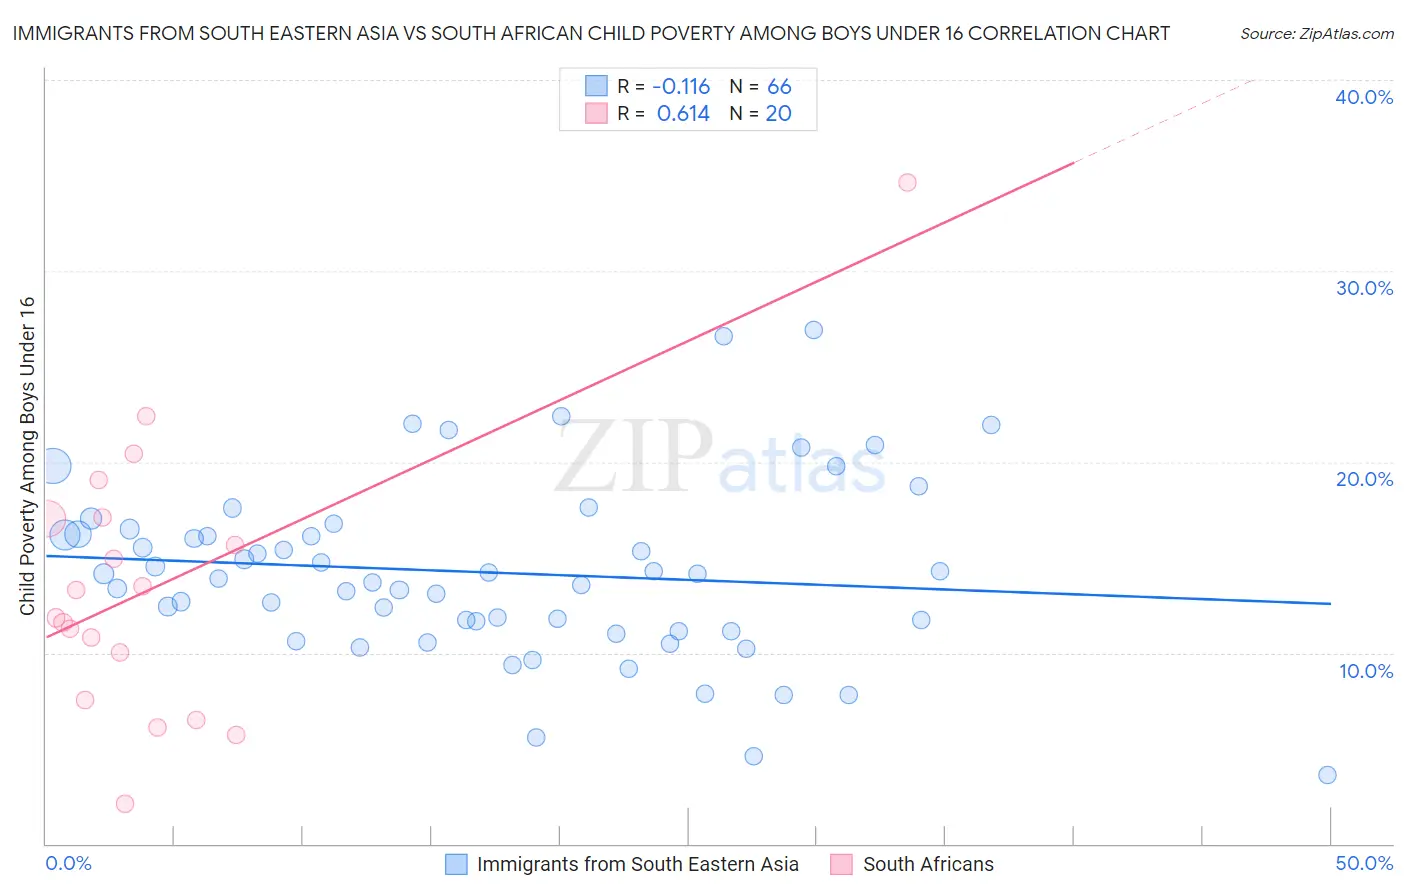 Immigrants from South Eastern Asia vs South African Child Poverty Among Boys Under 16